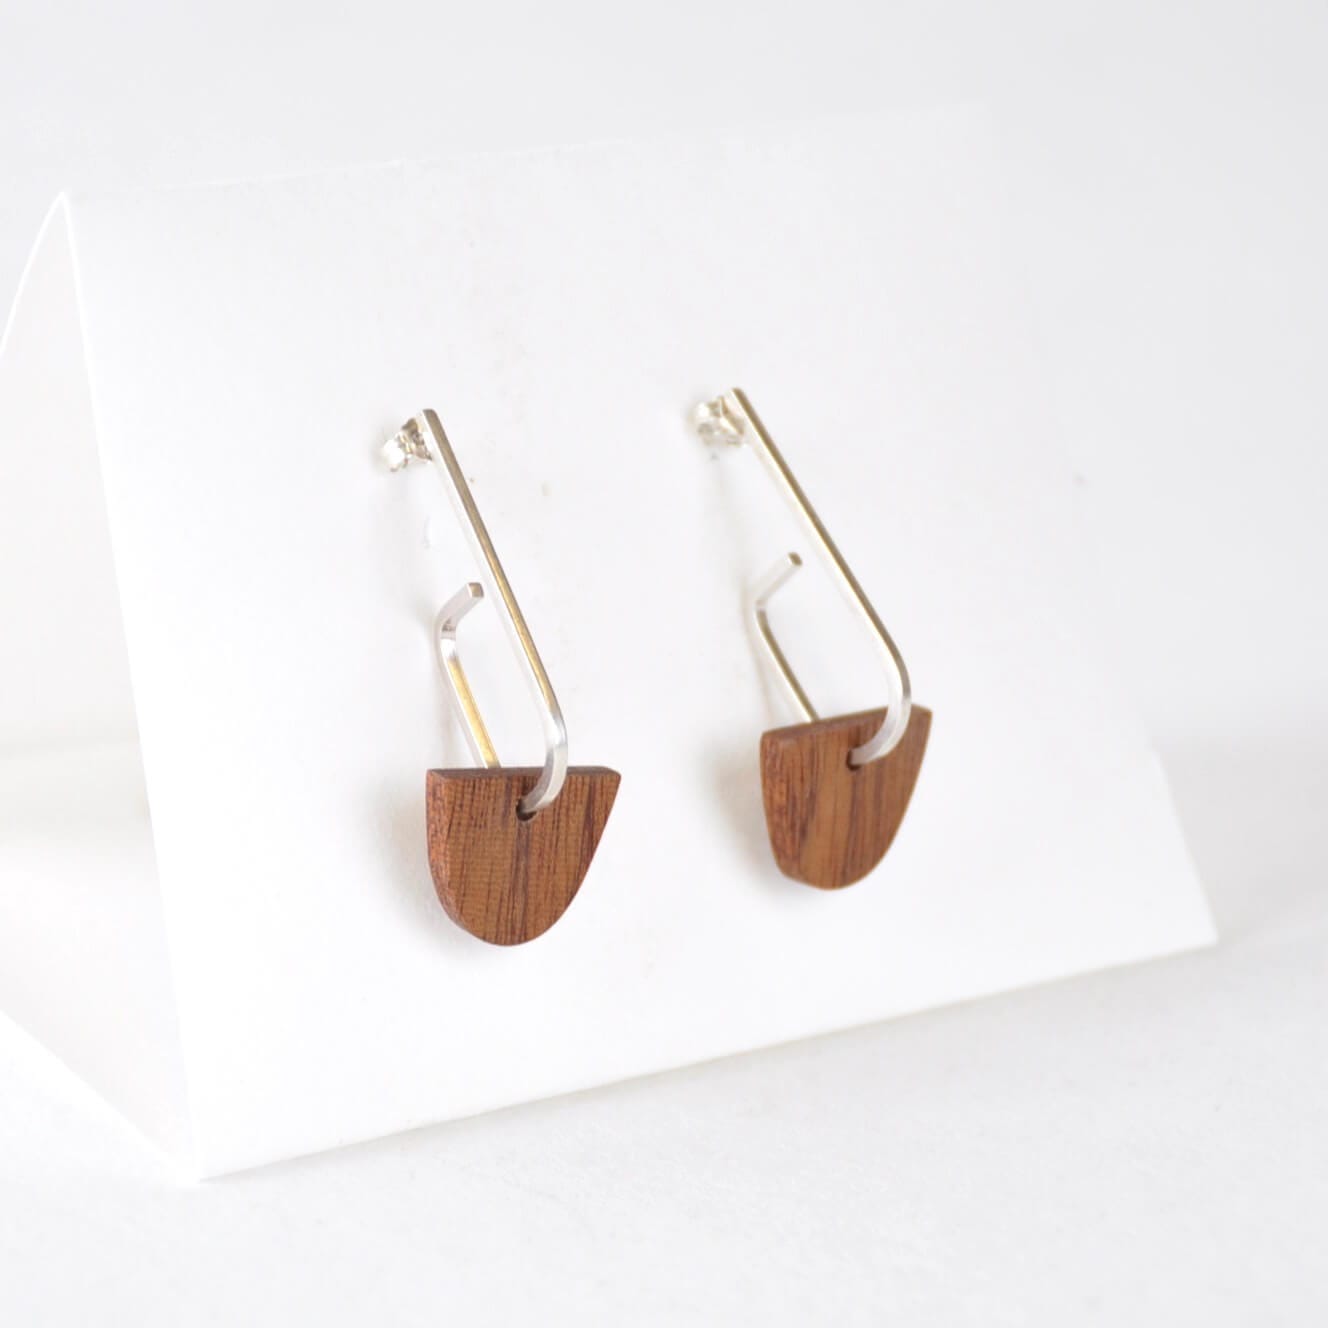 Priormade Woods a - Ipe ‘Jay x Wood ’ - Eco Silver and Reclaimed Wooden Earrings (multiple styles)